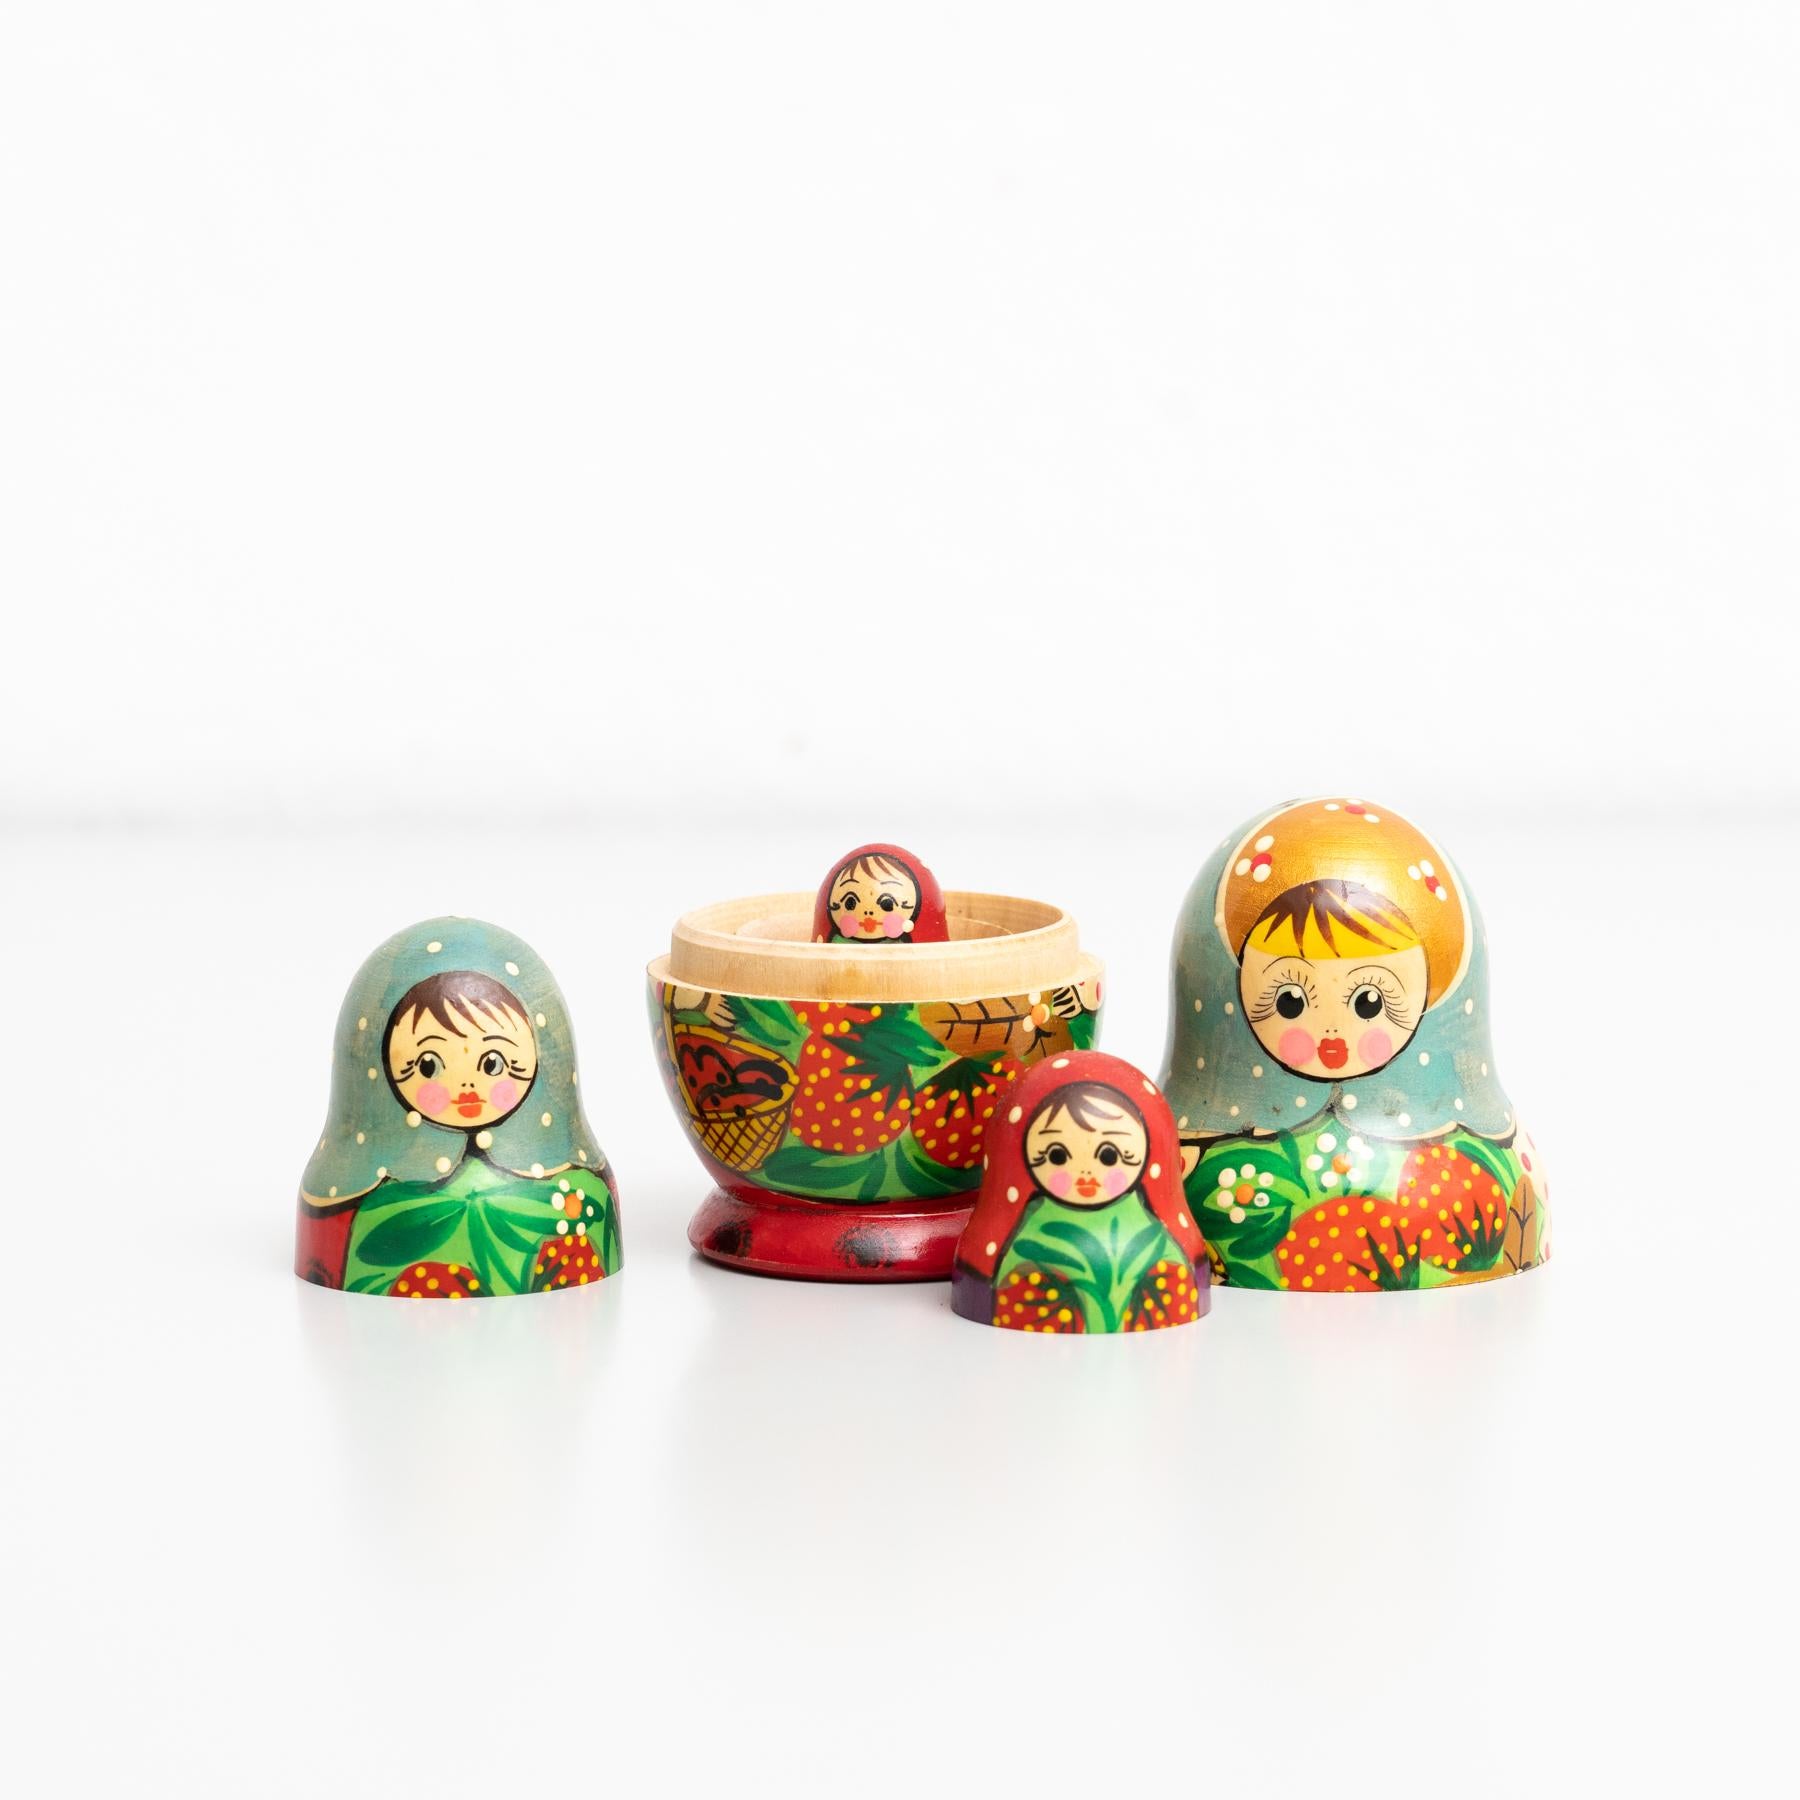 Antique Traditional Hand-Painted Wooden Russian Doll, circa 1960 For Sale 6